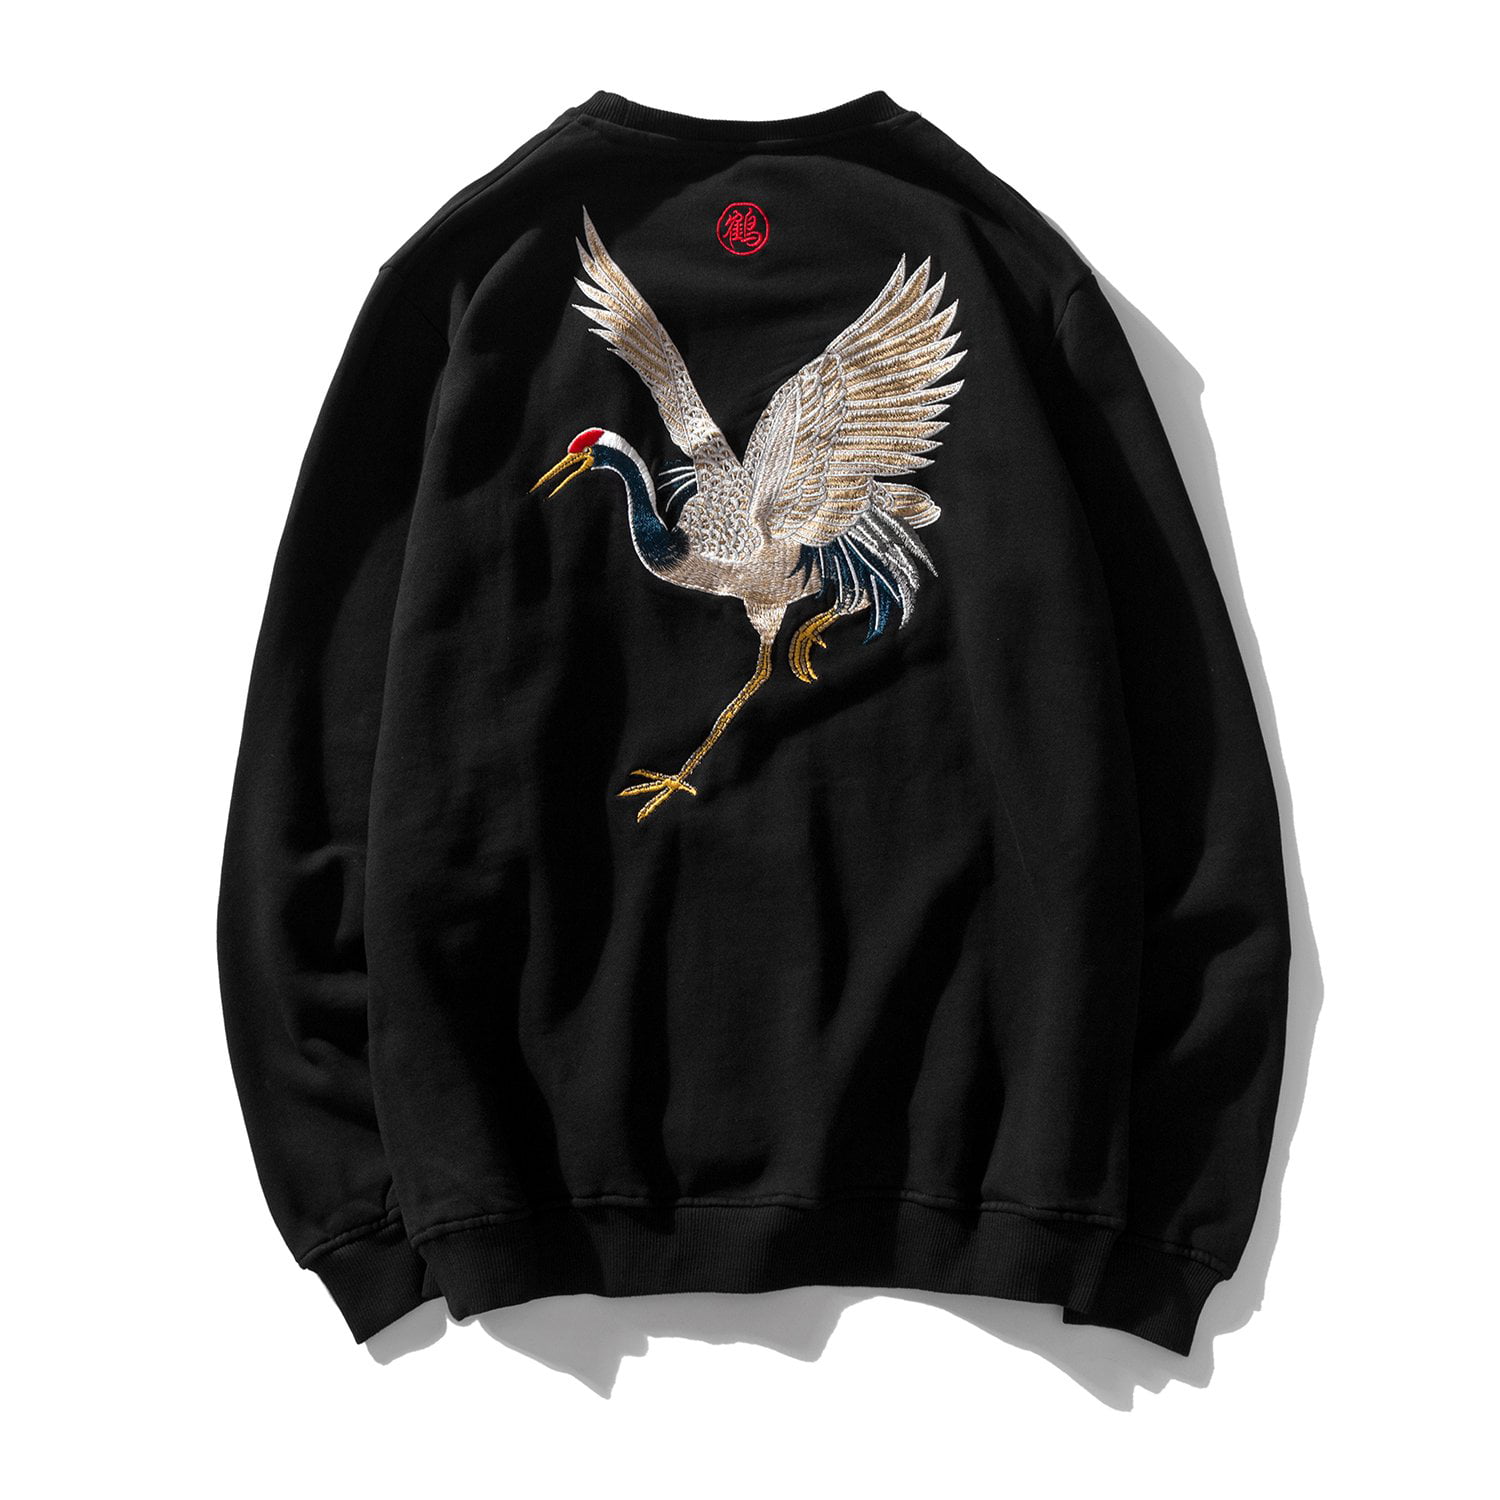 Chinese Fashion Crane Embroidery Art Hoodie Black Cotton Chinese Button Pullover